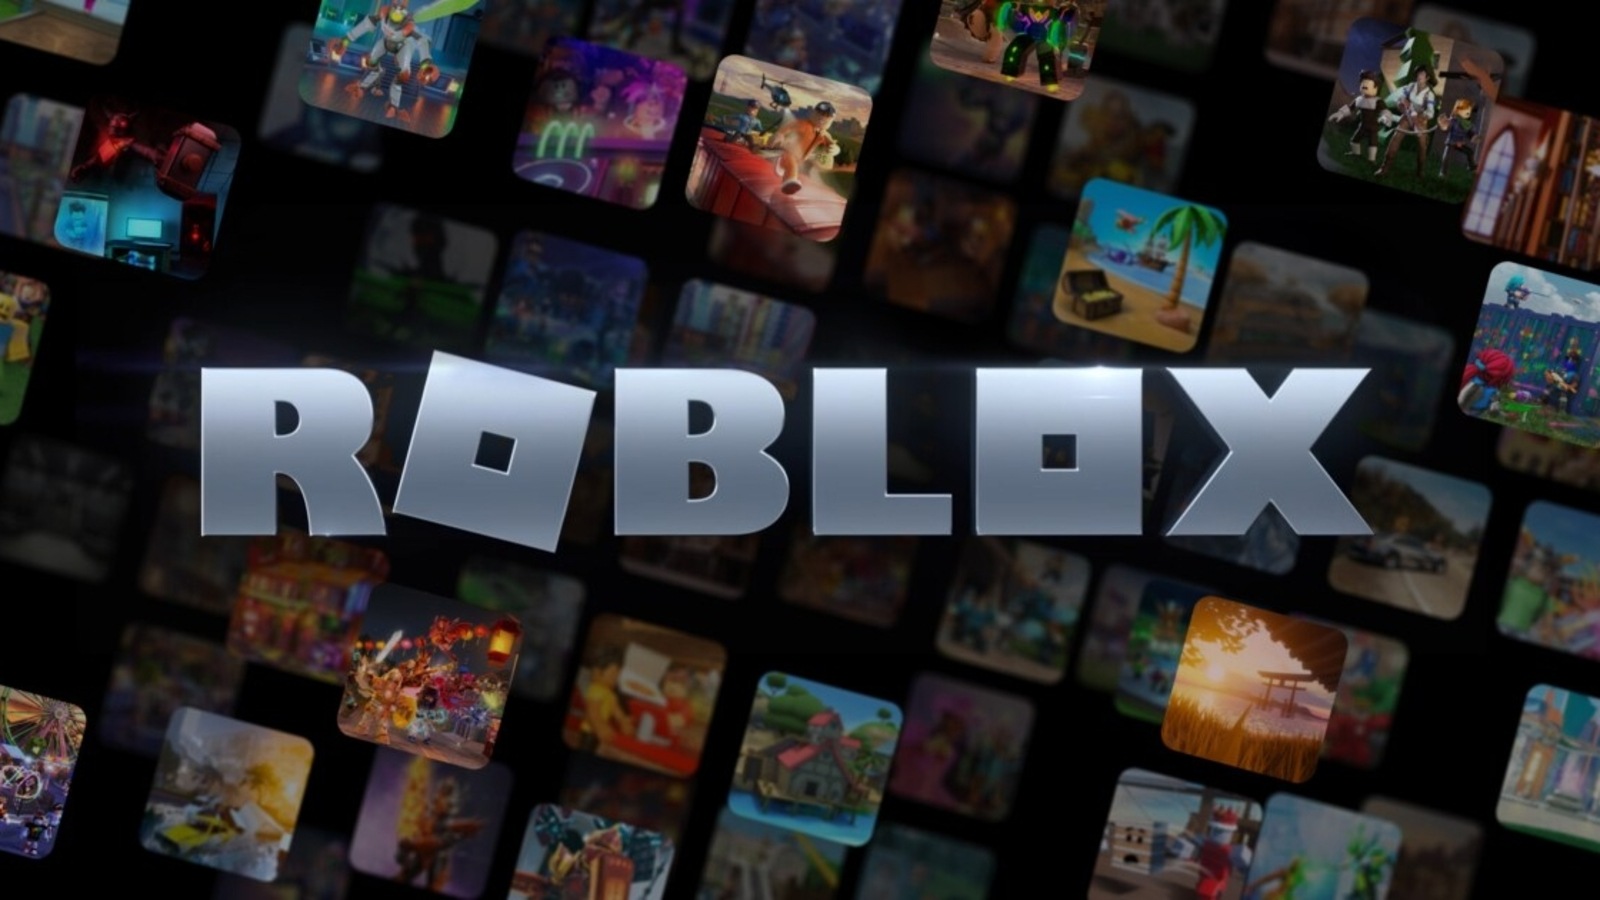 There's a new Robux icon! - Announcements - Developer Forum